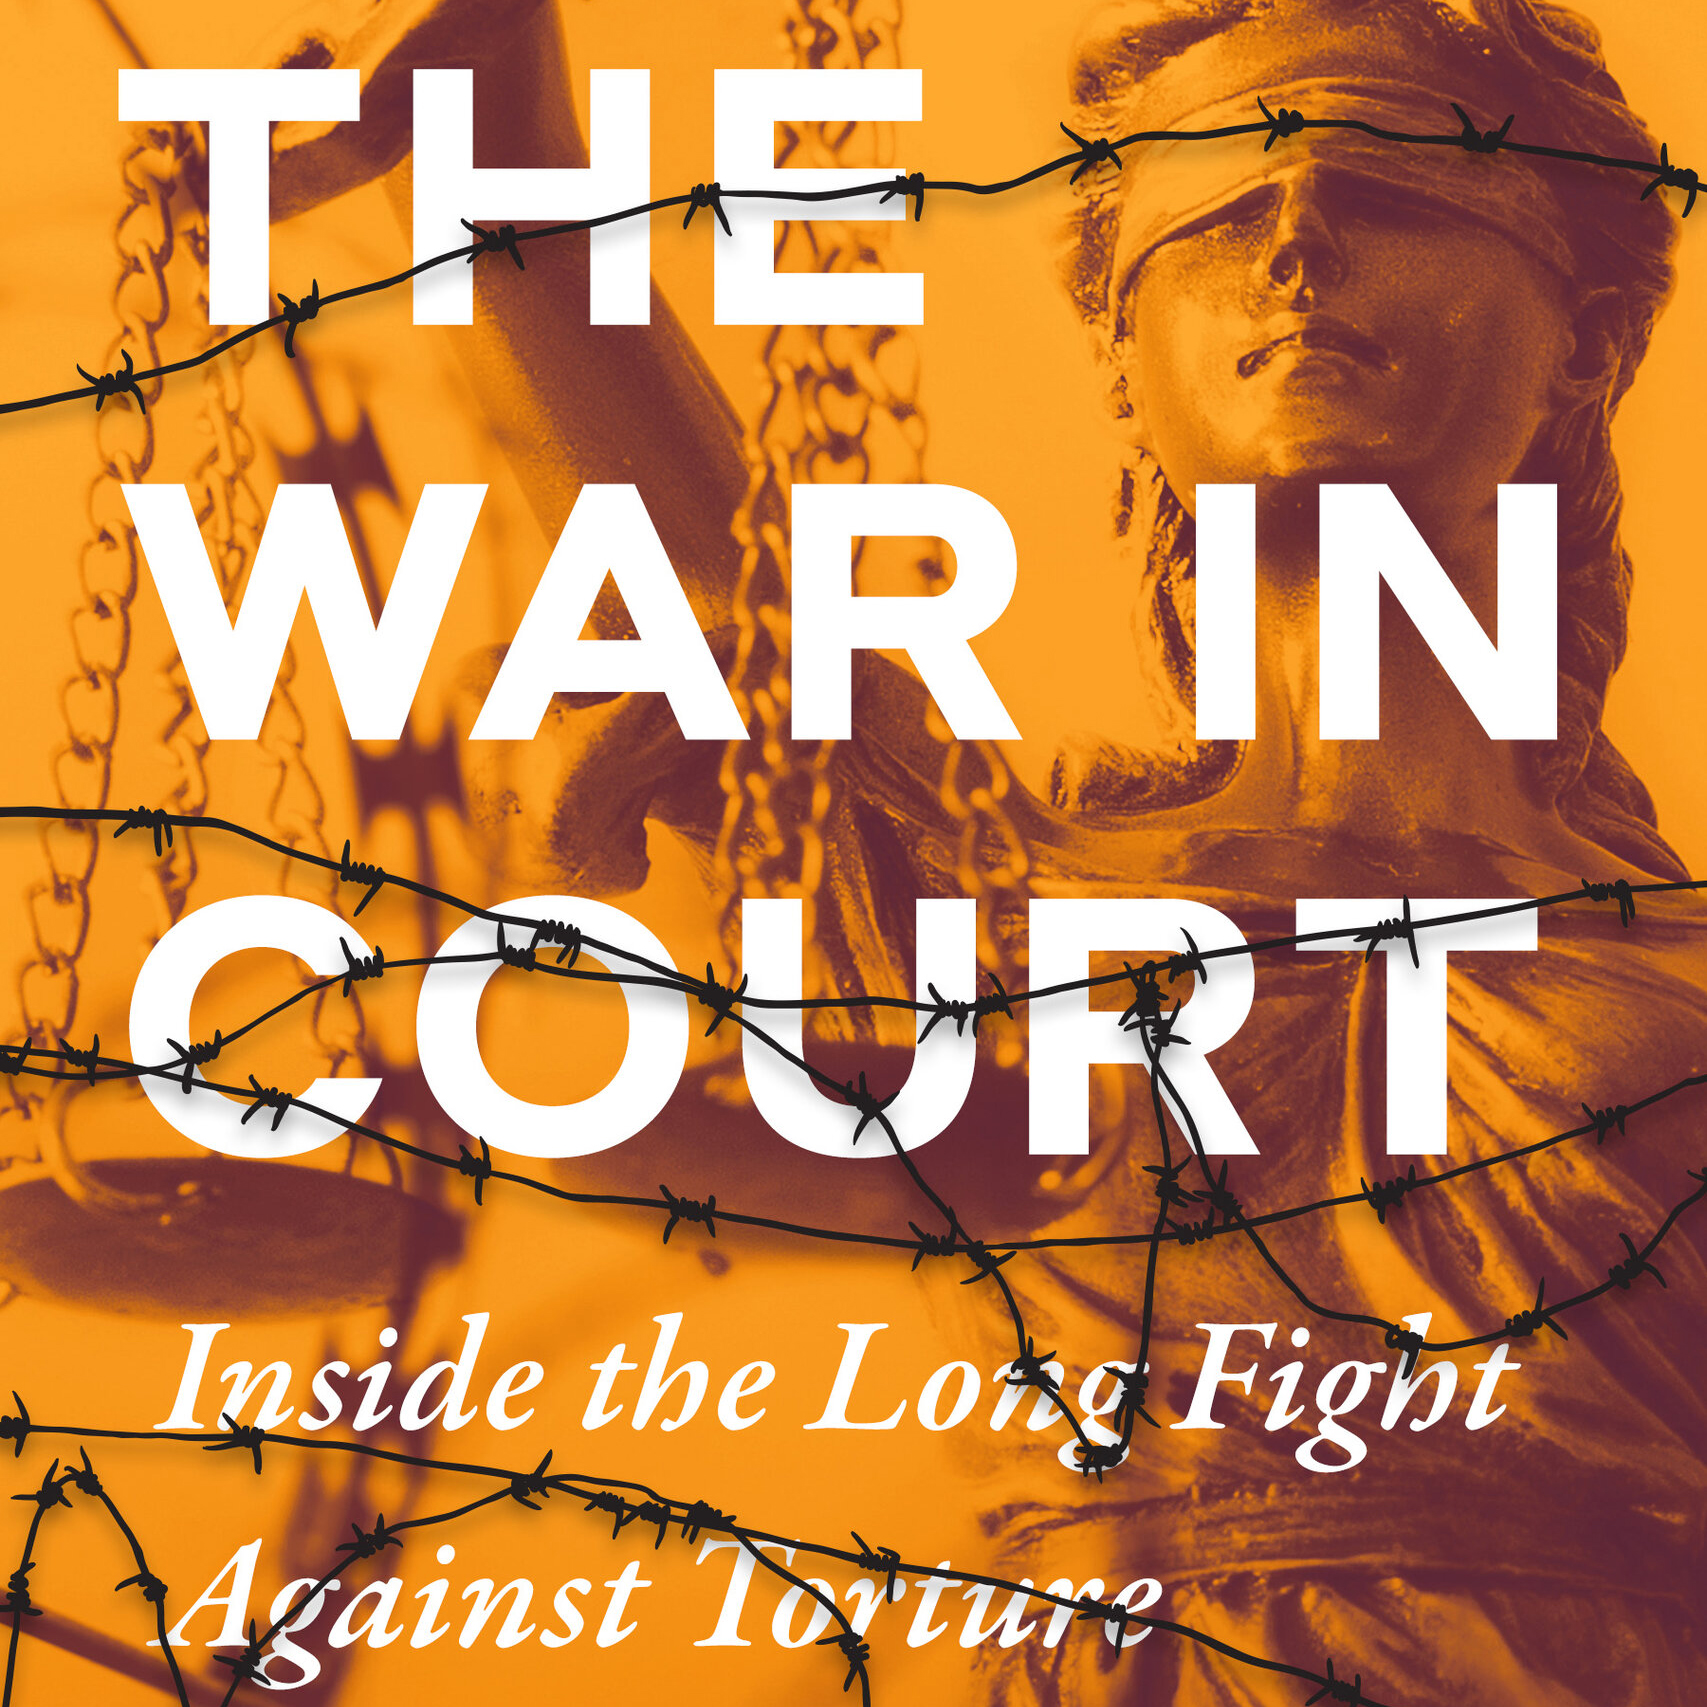 Lisa Hajjar on her book The War in Court: Inside the Long Fight against Torture